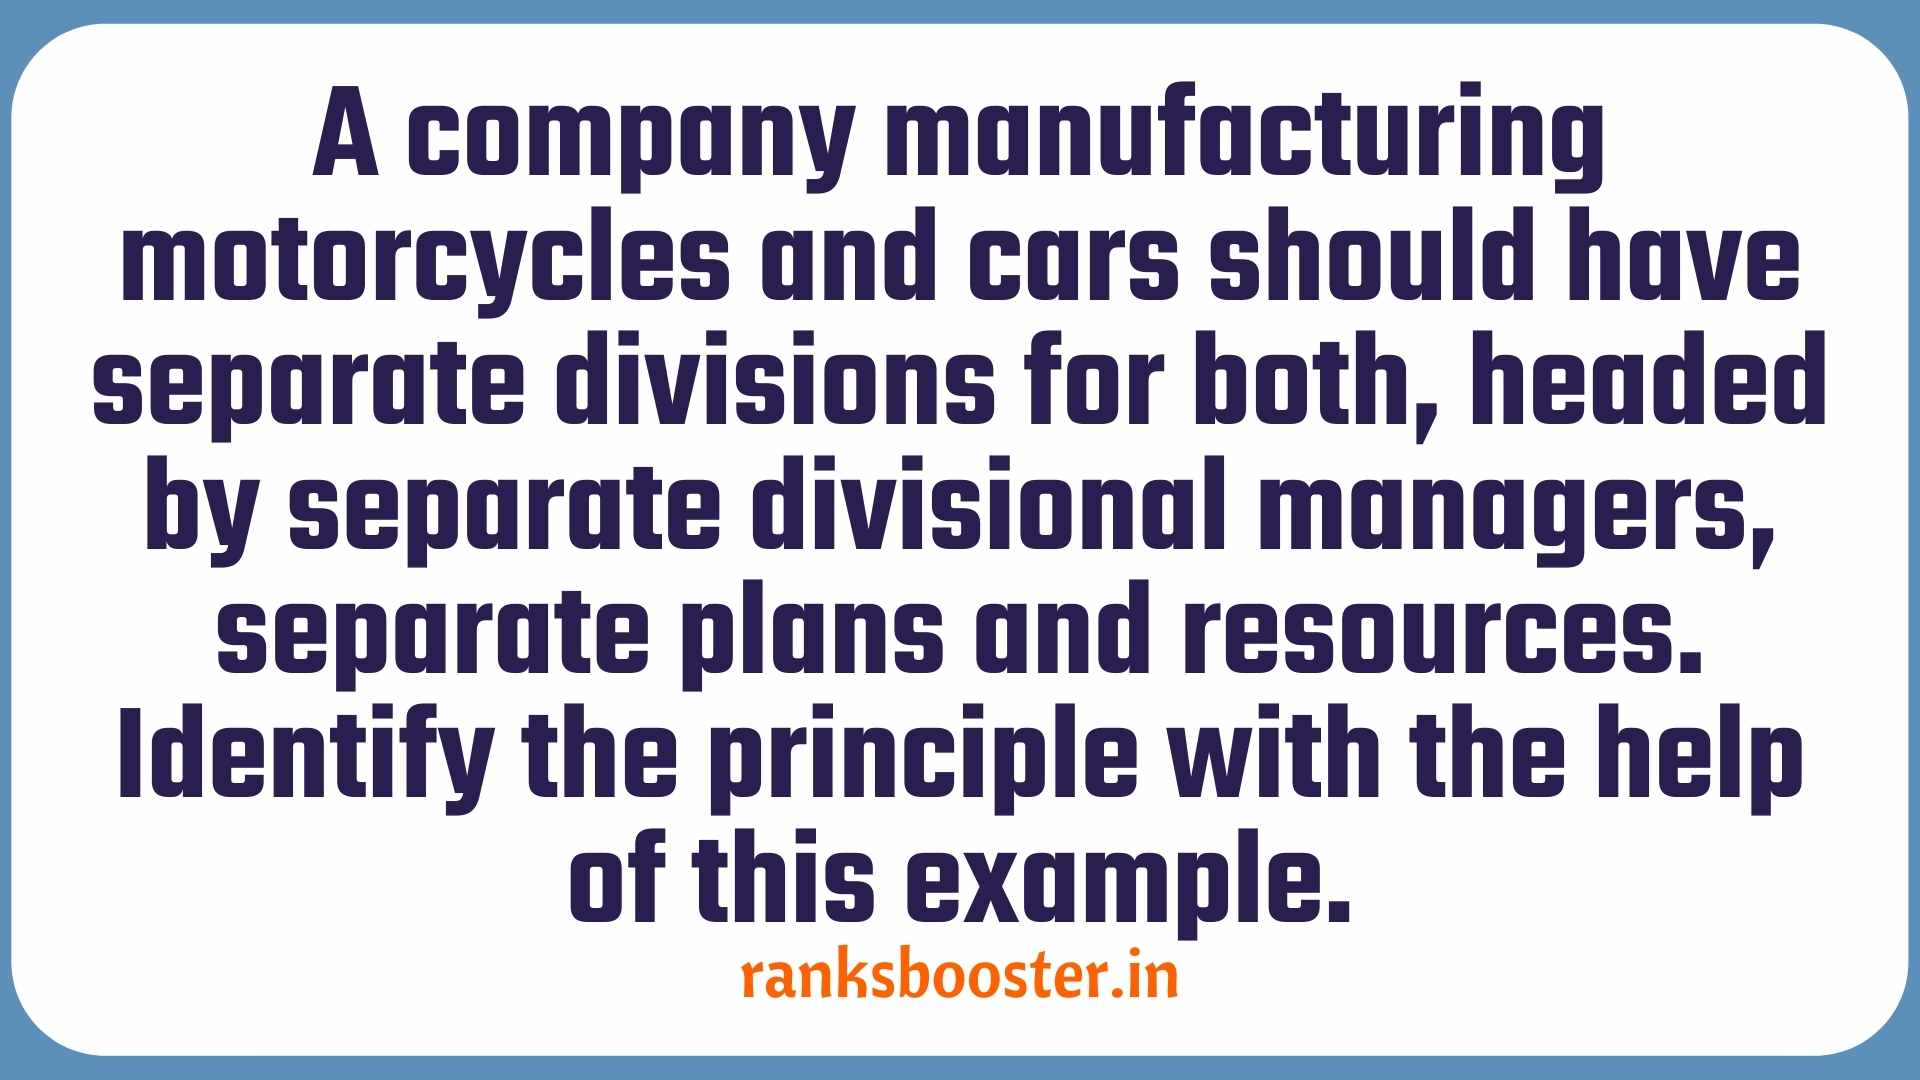 A company manufacturing motorcycles and cars should have separate divisions for both, headed by separate divisional managers, separate plans and resources. Identify the principle with the help of this example.